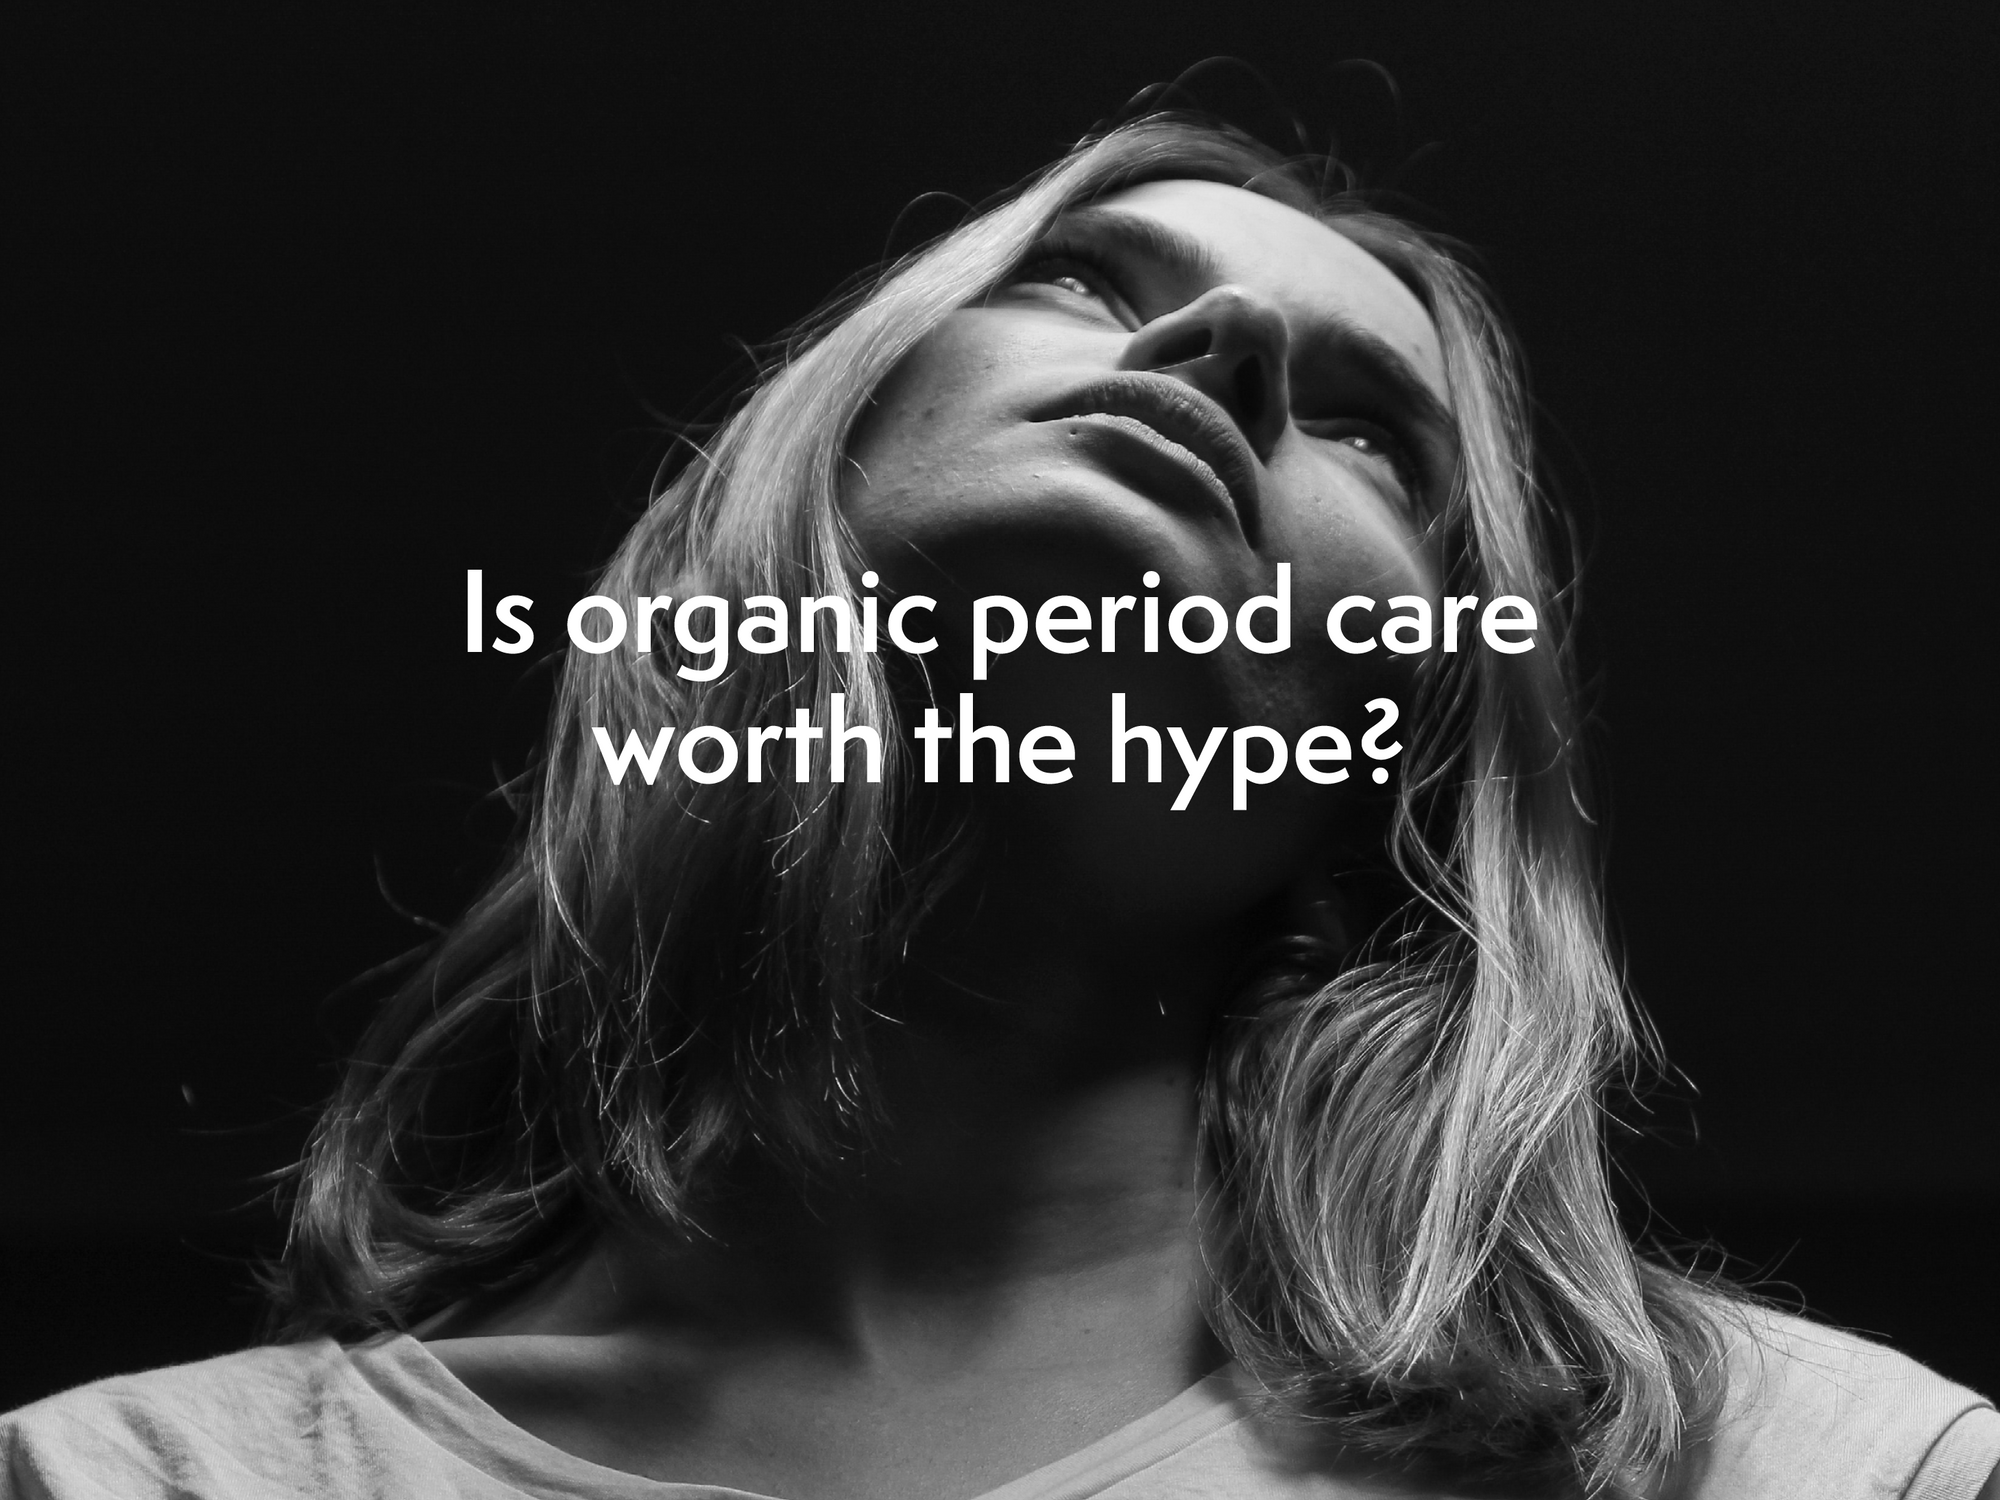 Is organic period care worth the hype?